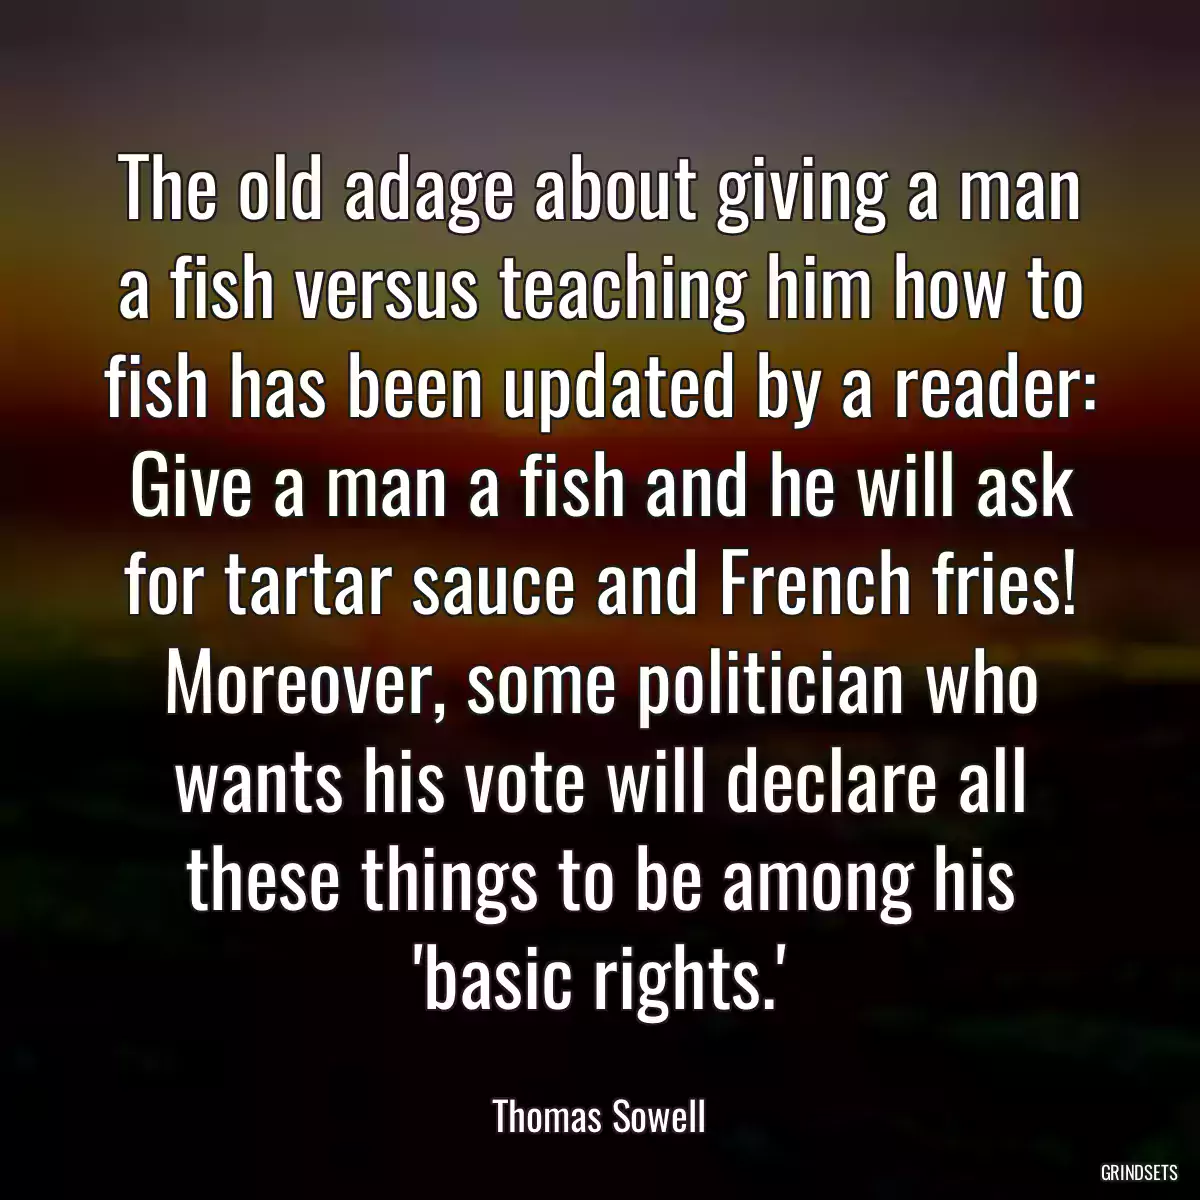 The old adage about giving a man a fish versus teaching him how to fish has been updated by a reader: Give a man a fish and he will ask for tartar sauce and French fries! Moreover, some politician who wants his vote will declare all these things to be among his \'basic rights.\'